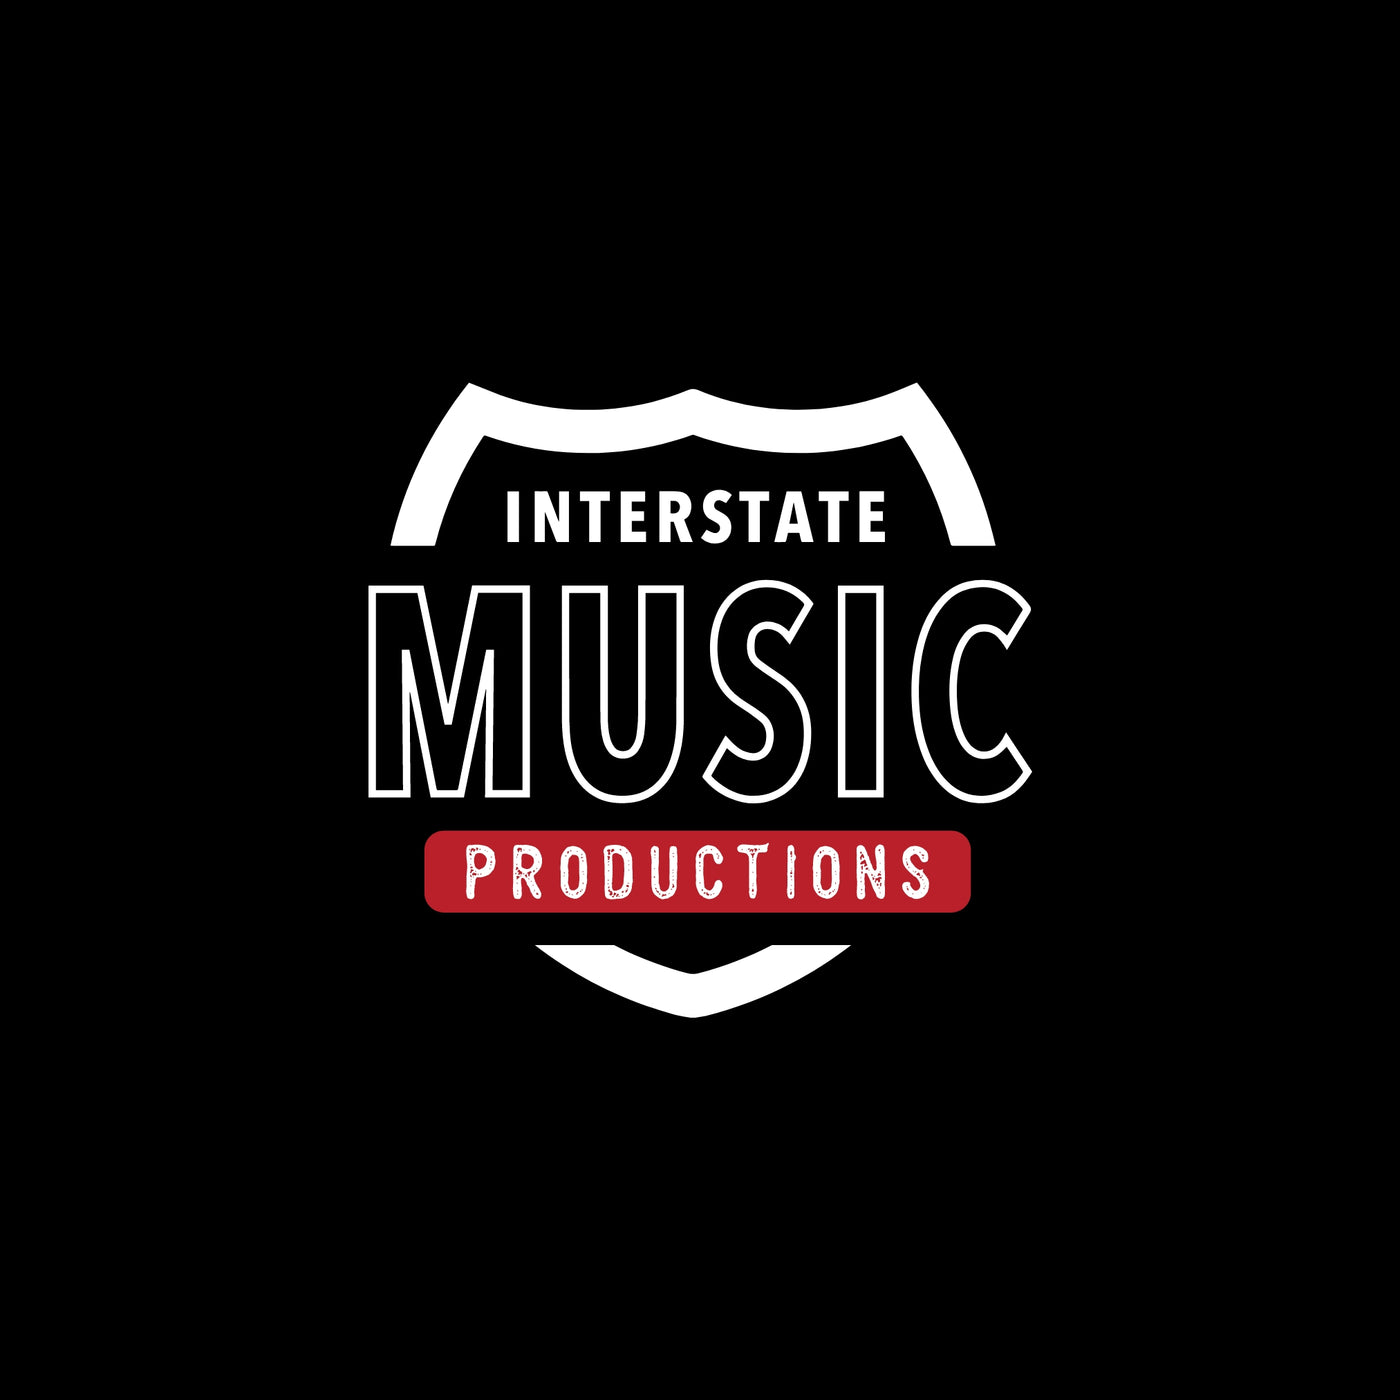 Interstate Music Productions - Service Packages